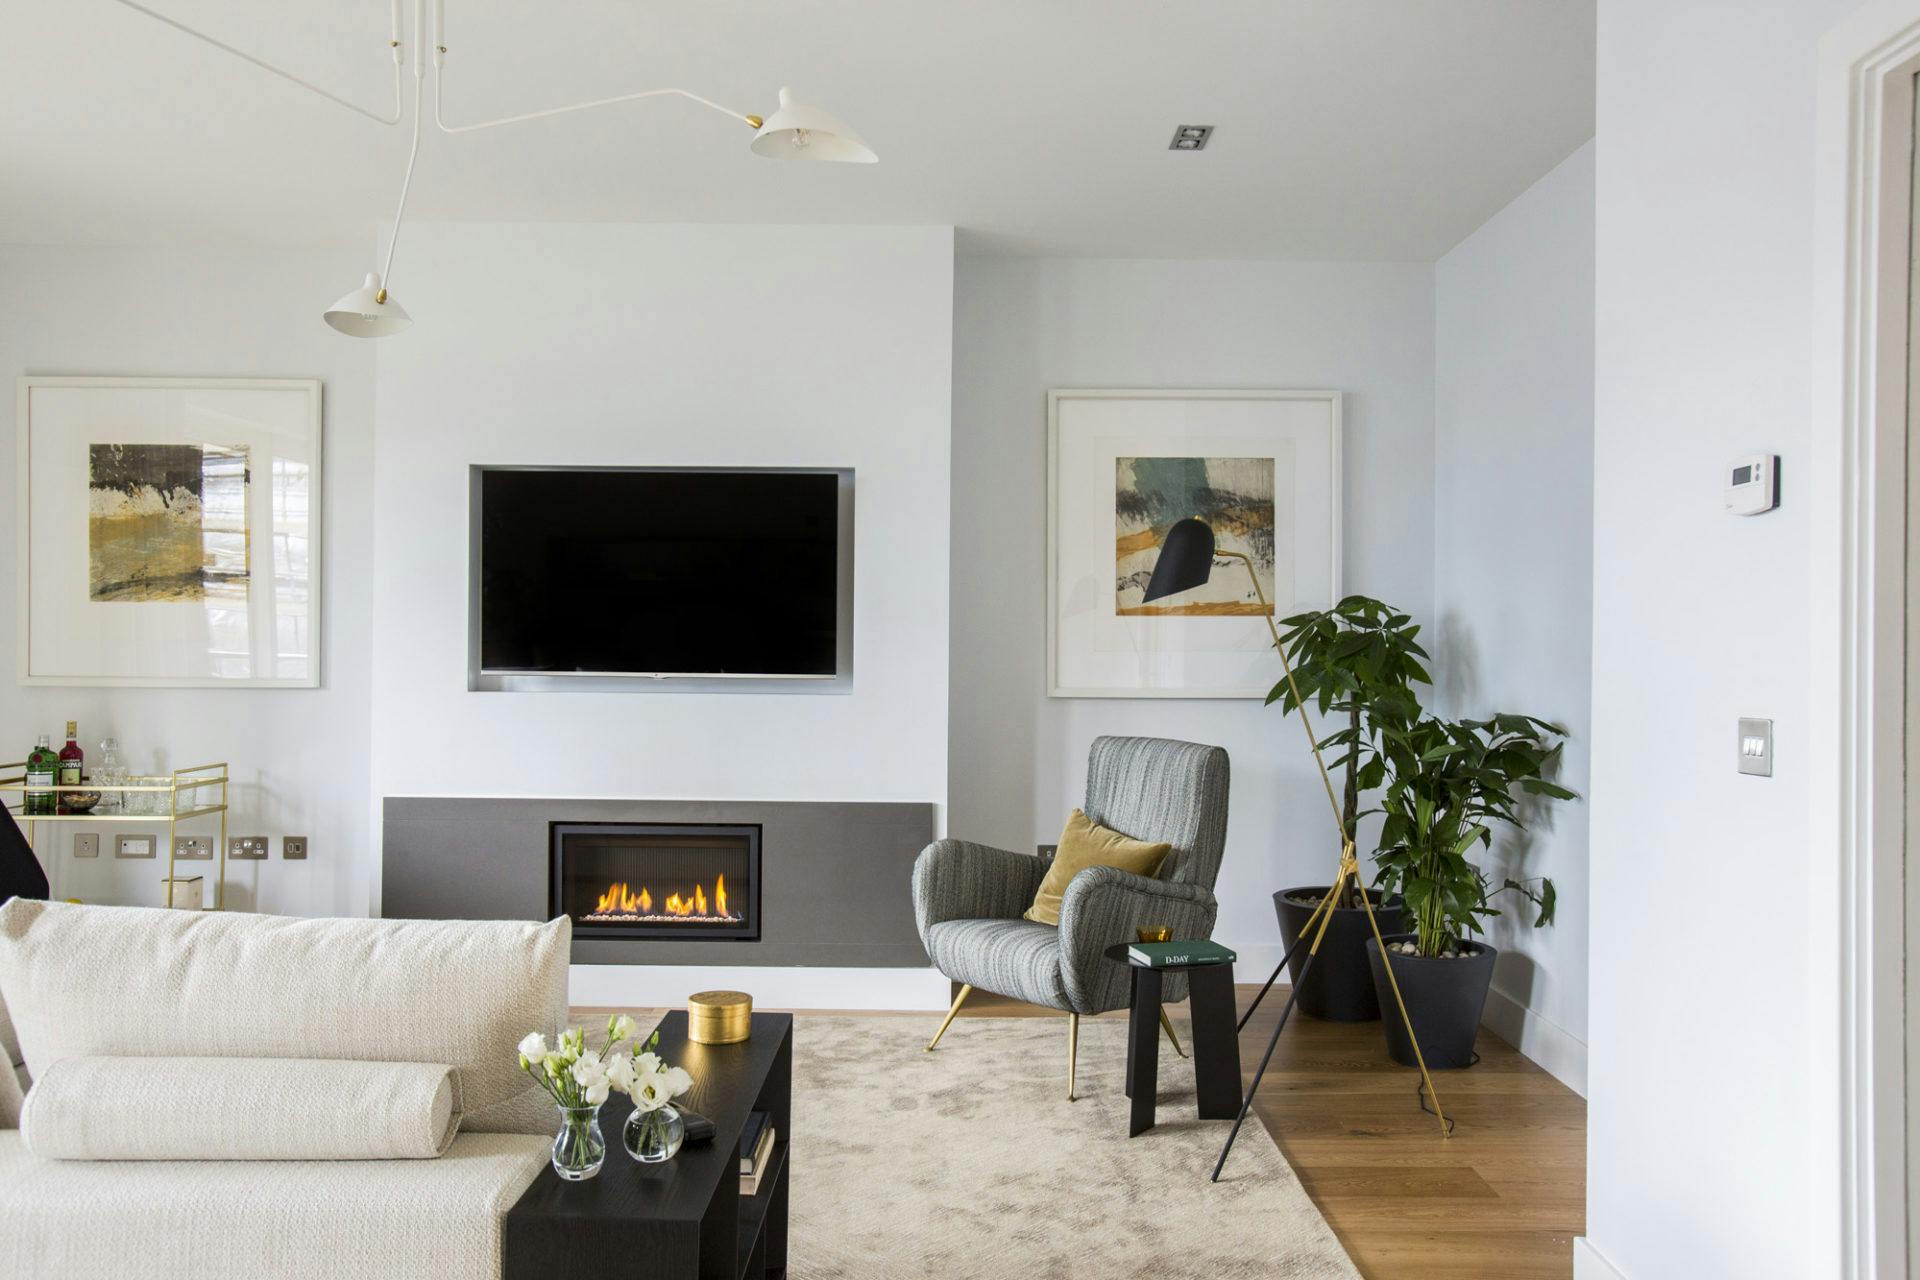 Modern living room with a wall-mounted TV, electric fireplace, abstract art, and a comfortable grey armchair.